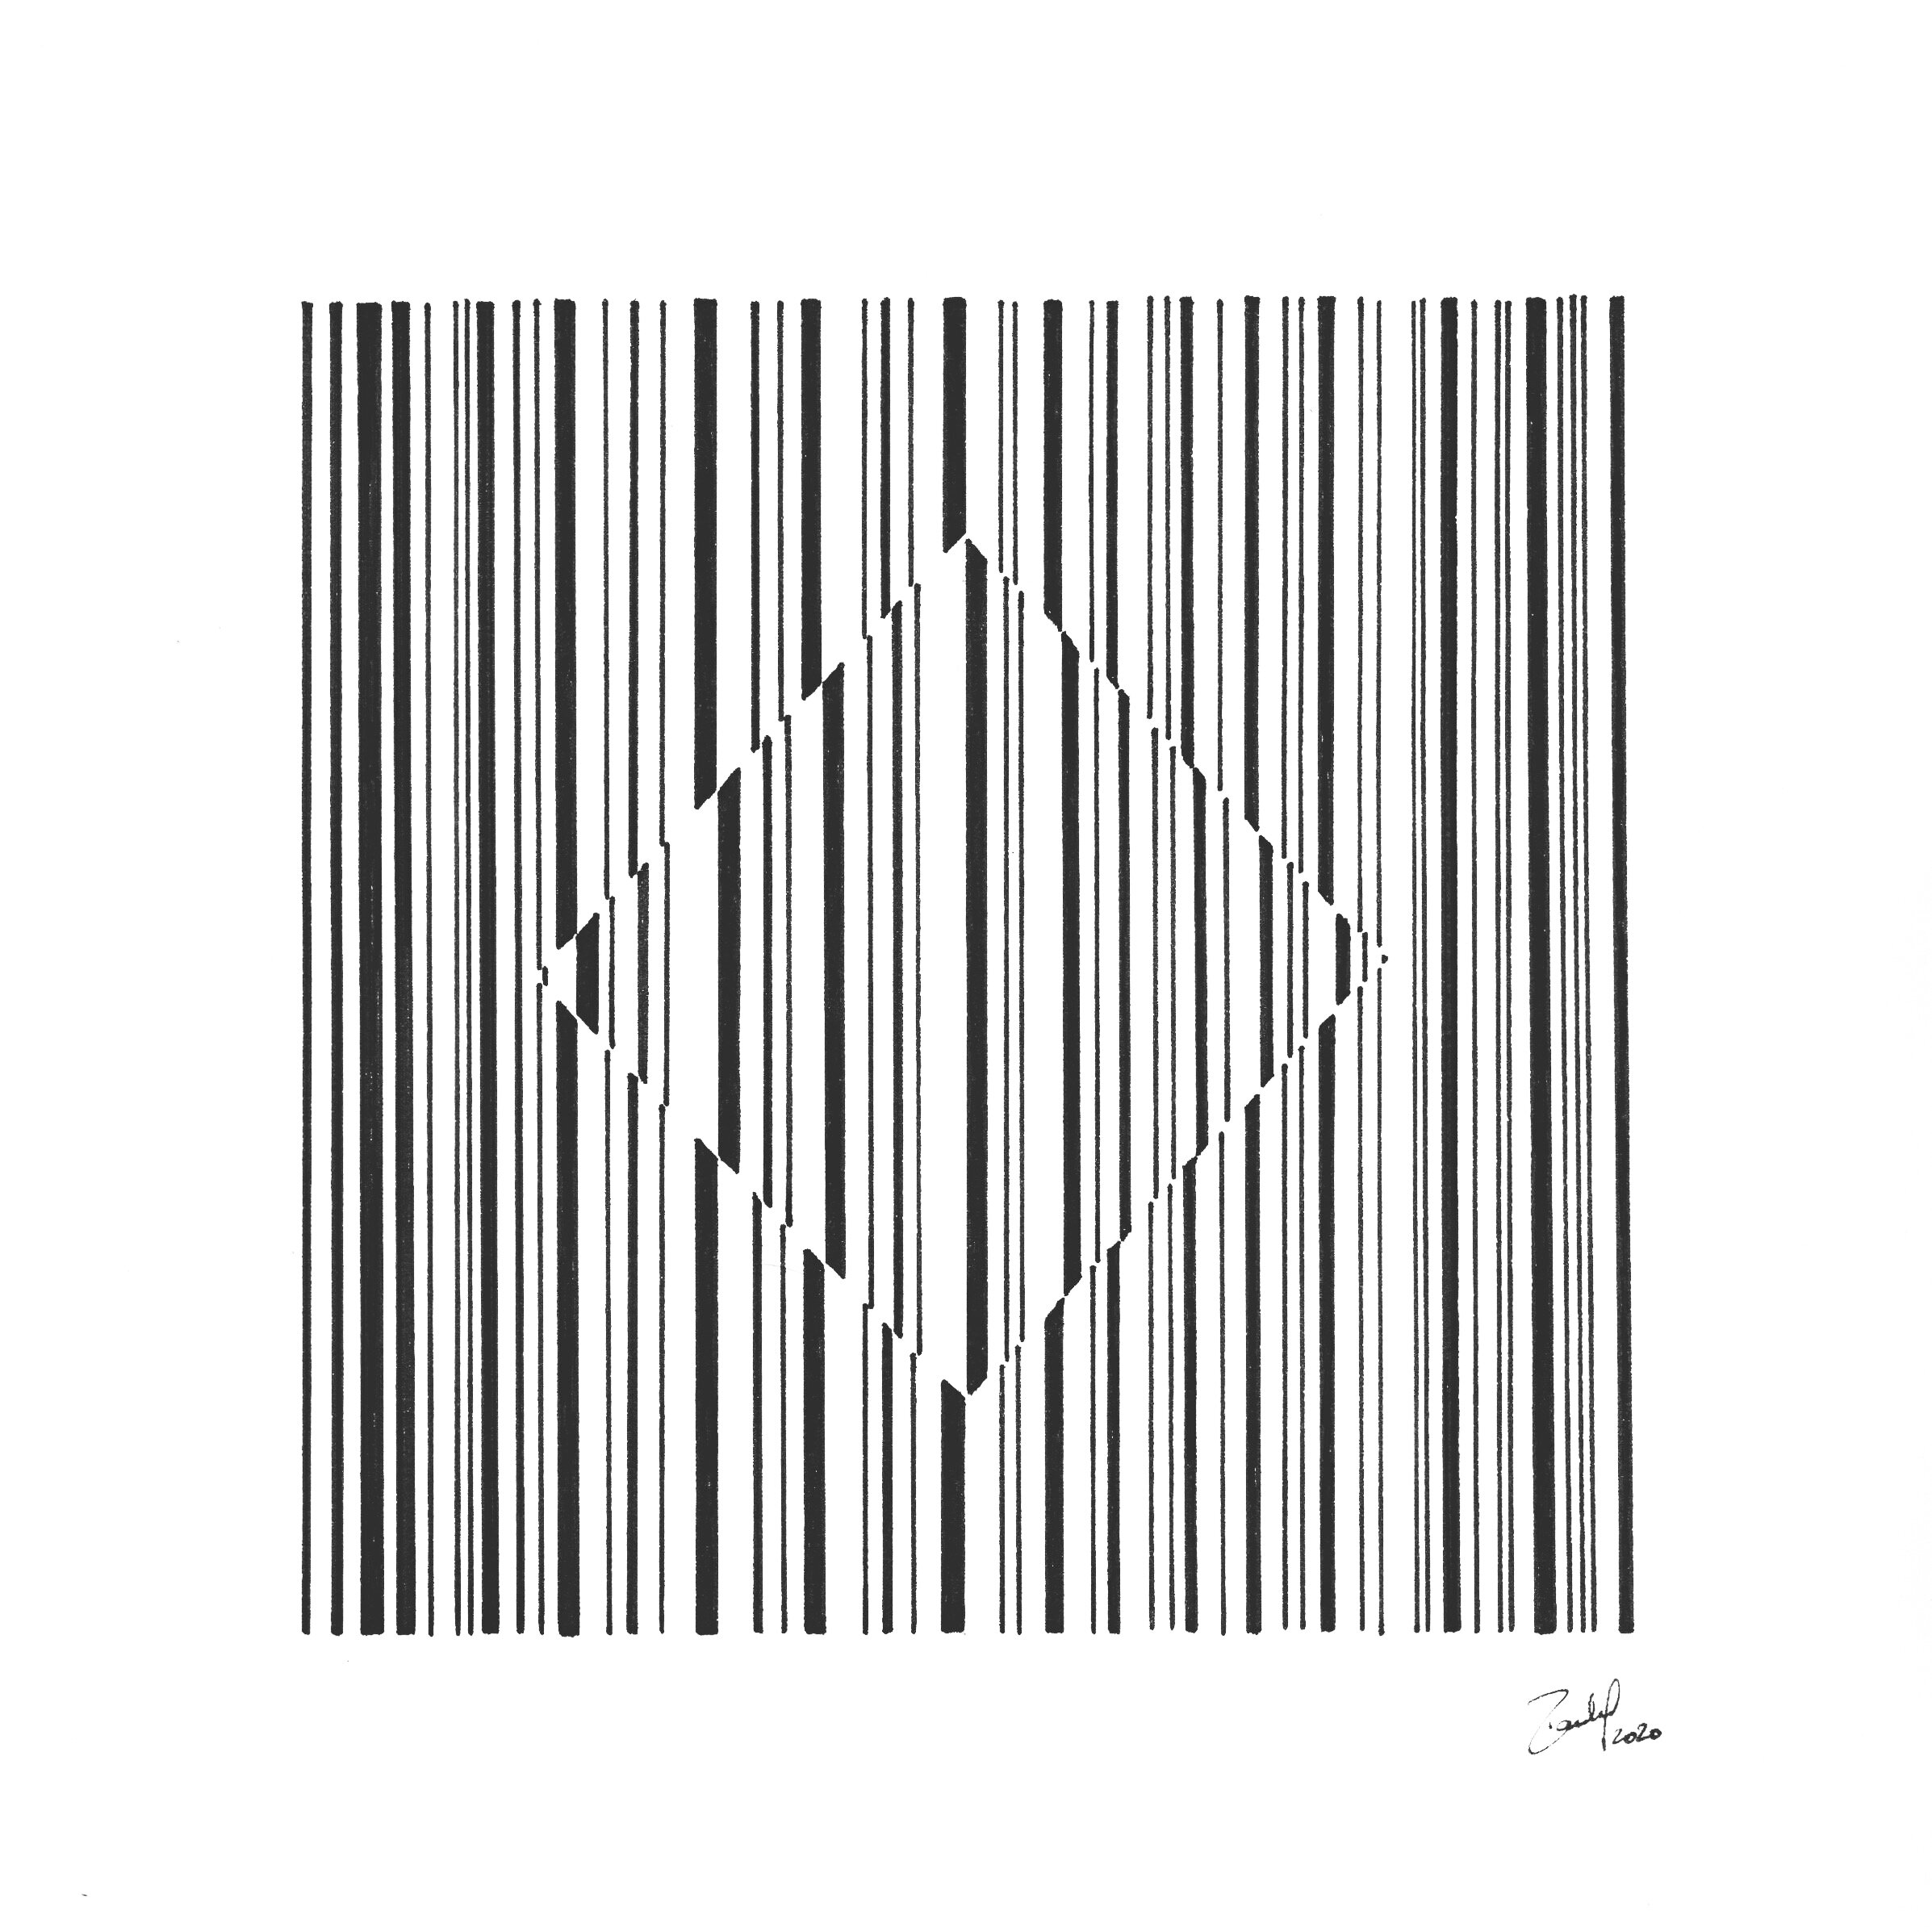 Shifted barcode